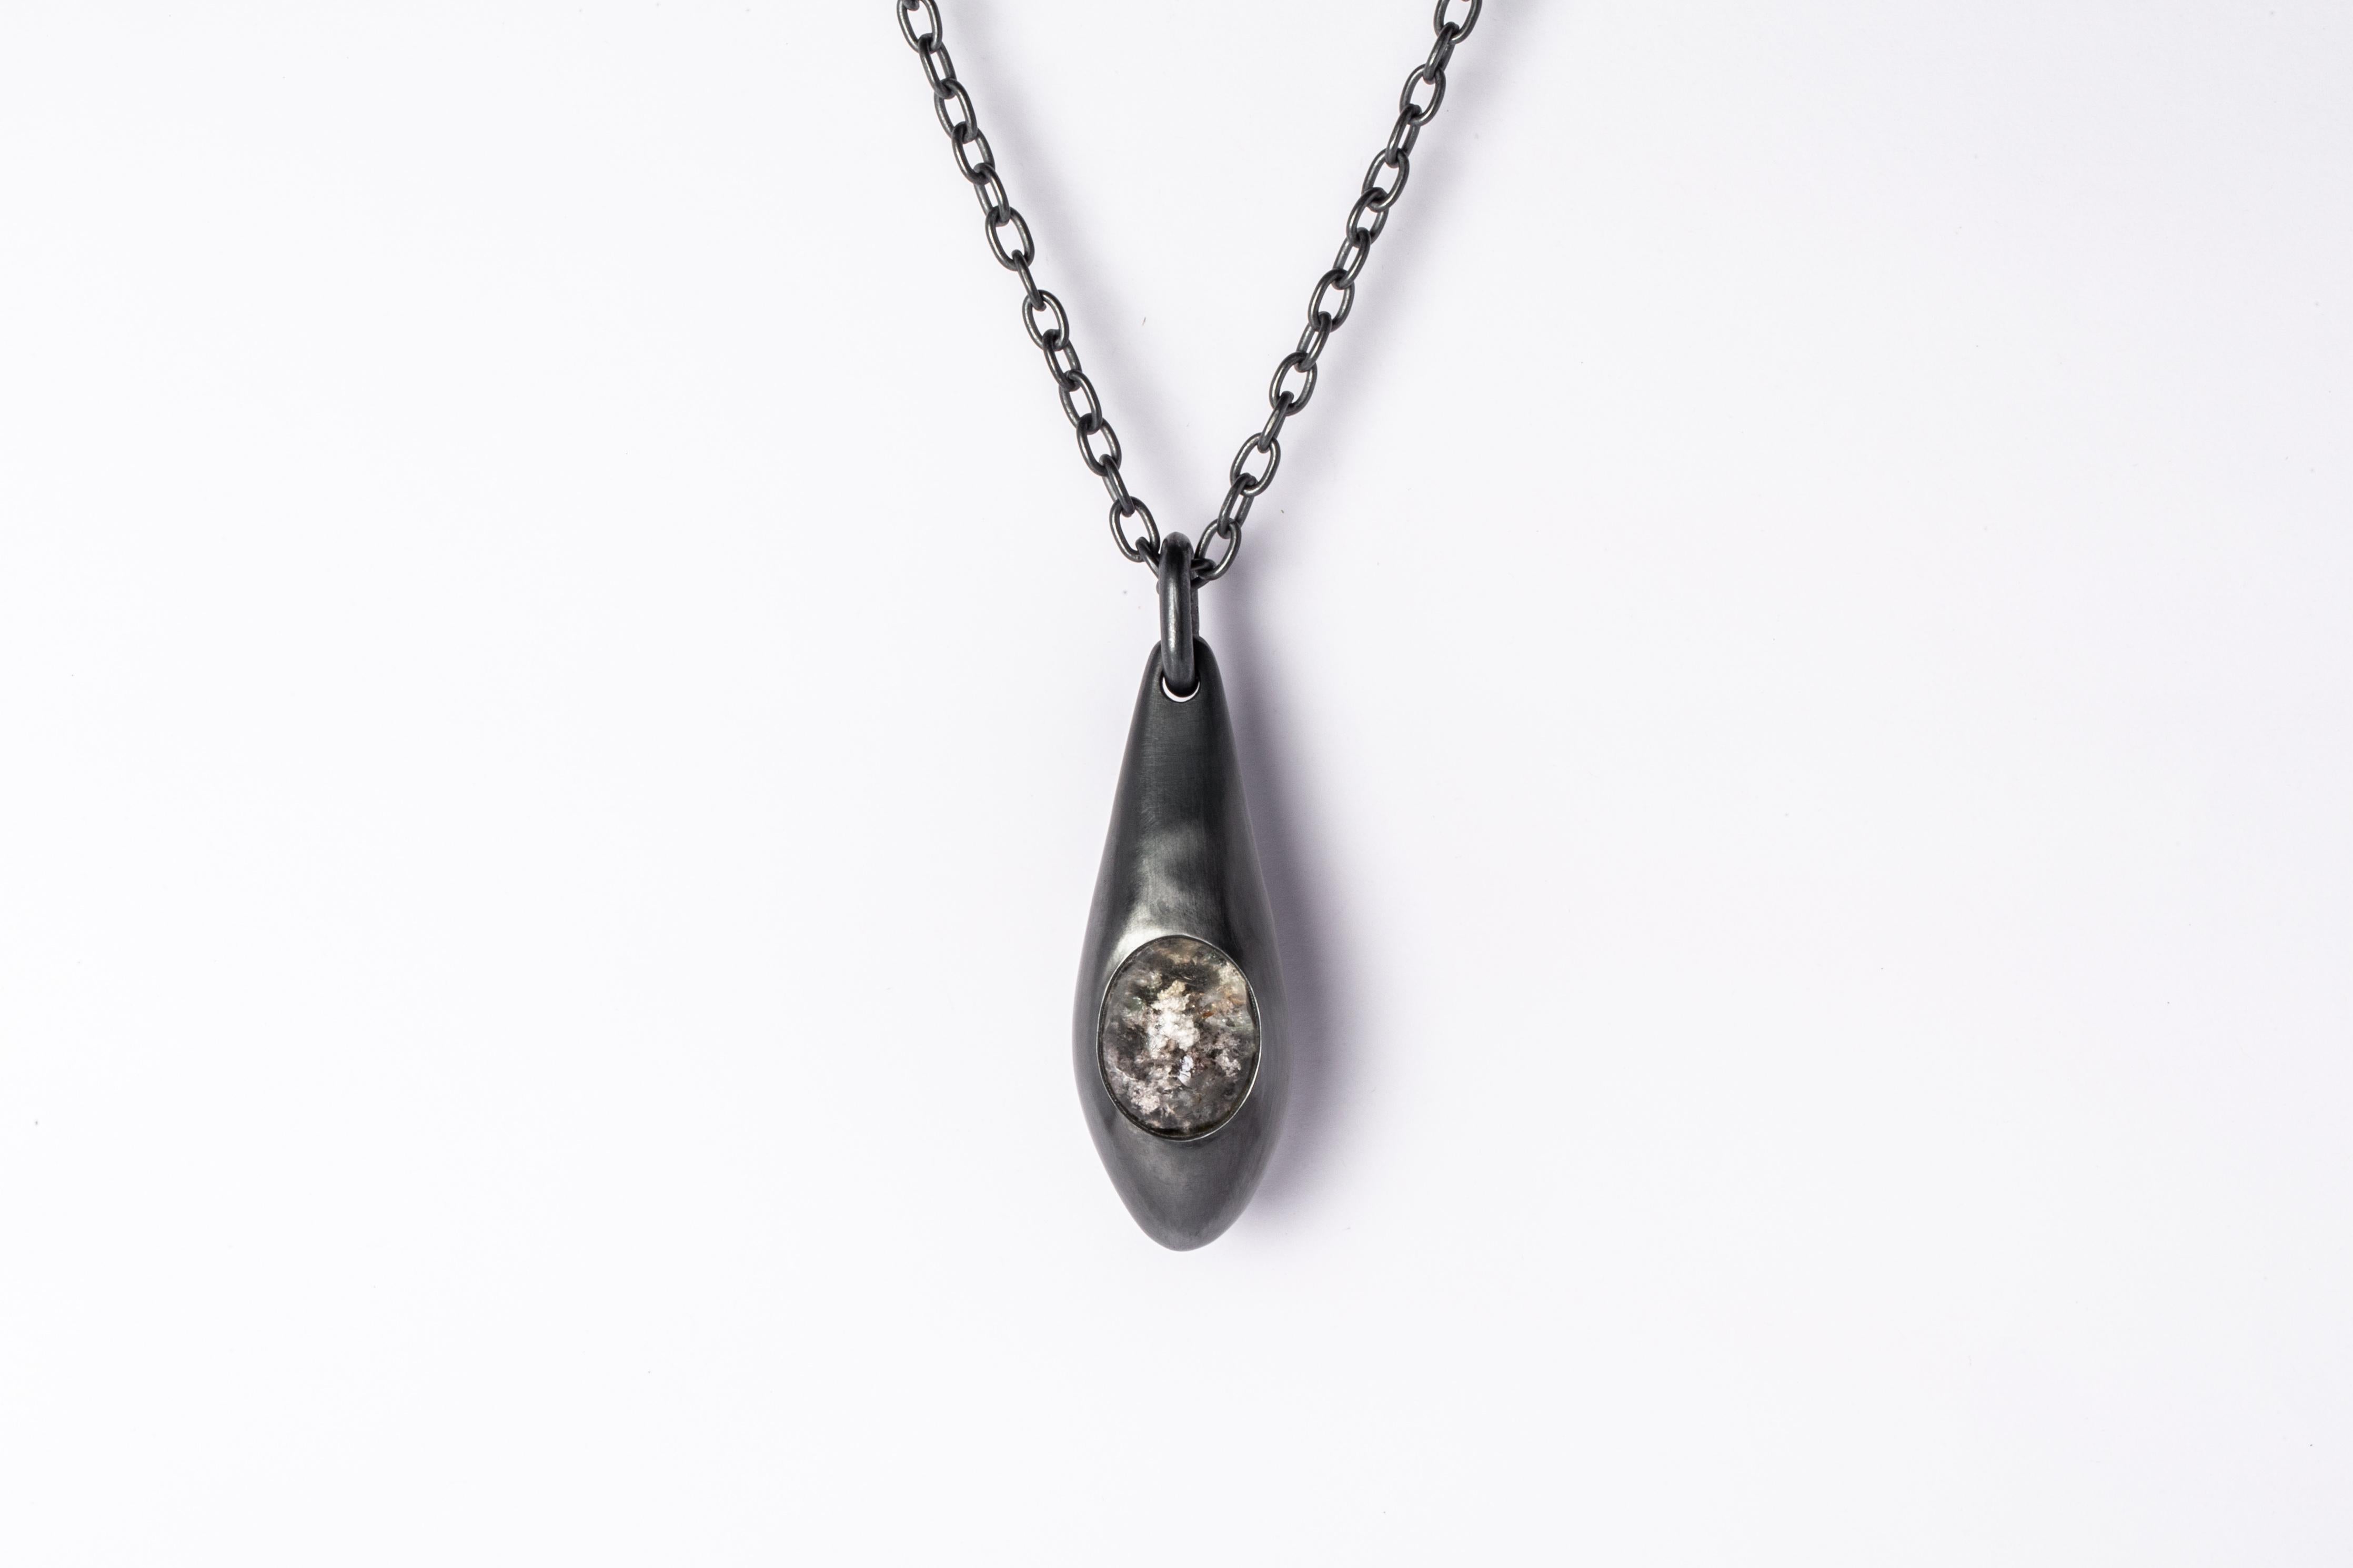 Necklace in black sterling and a rough garden quartz. Black Sterling is a surface oxidation of sterling silver. This finish may fade over time, which can be considered an enhancement. It comes on 74 cm sterling silver chain.